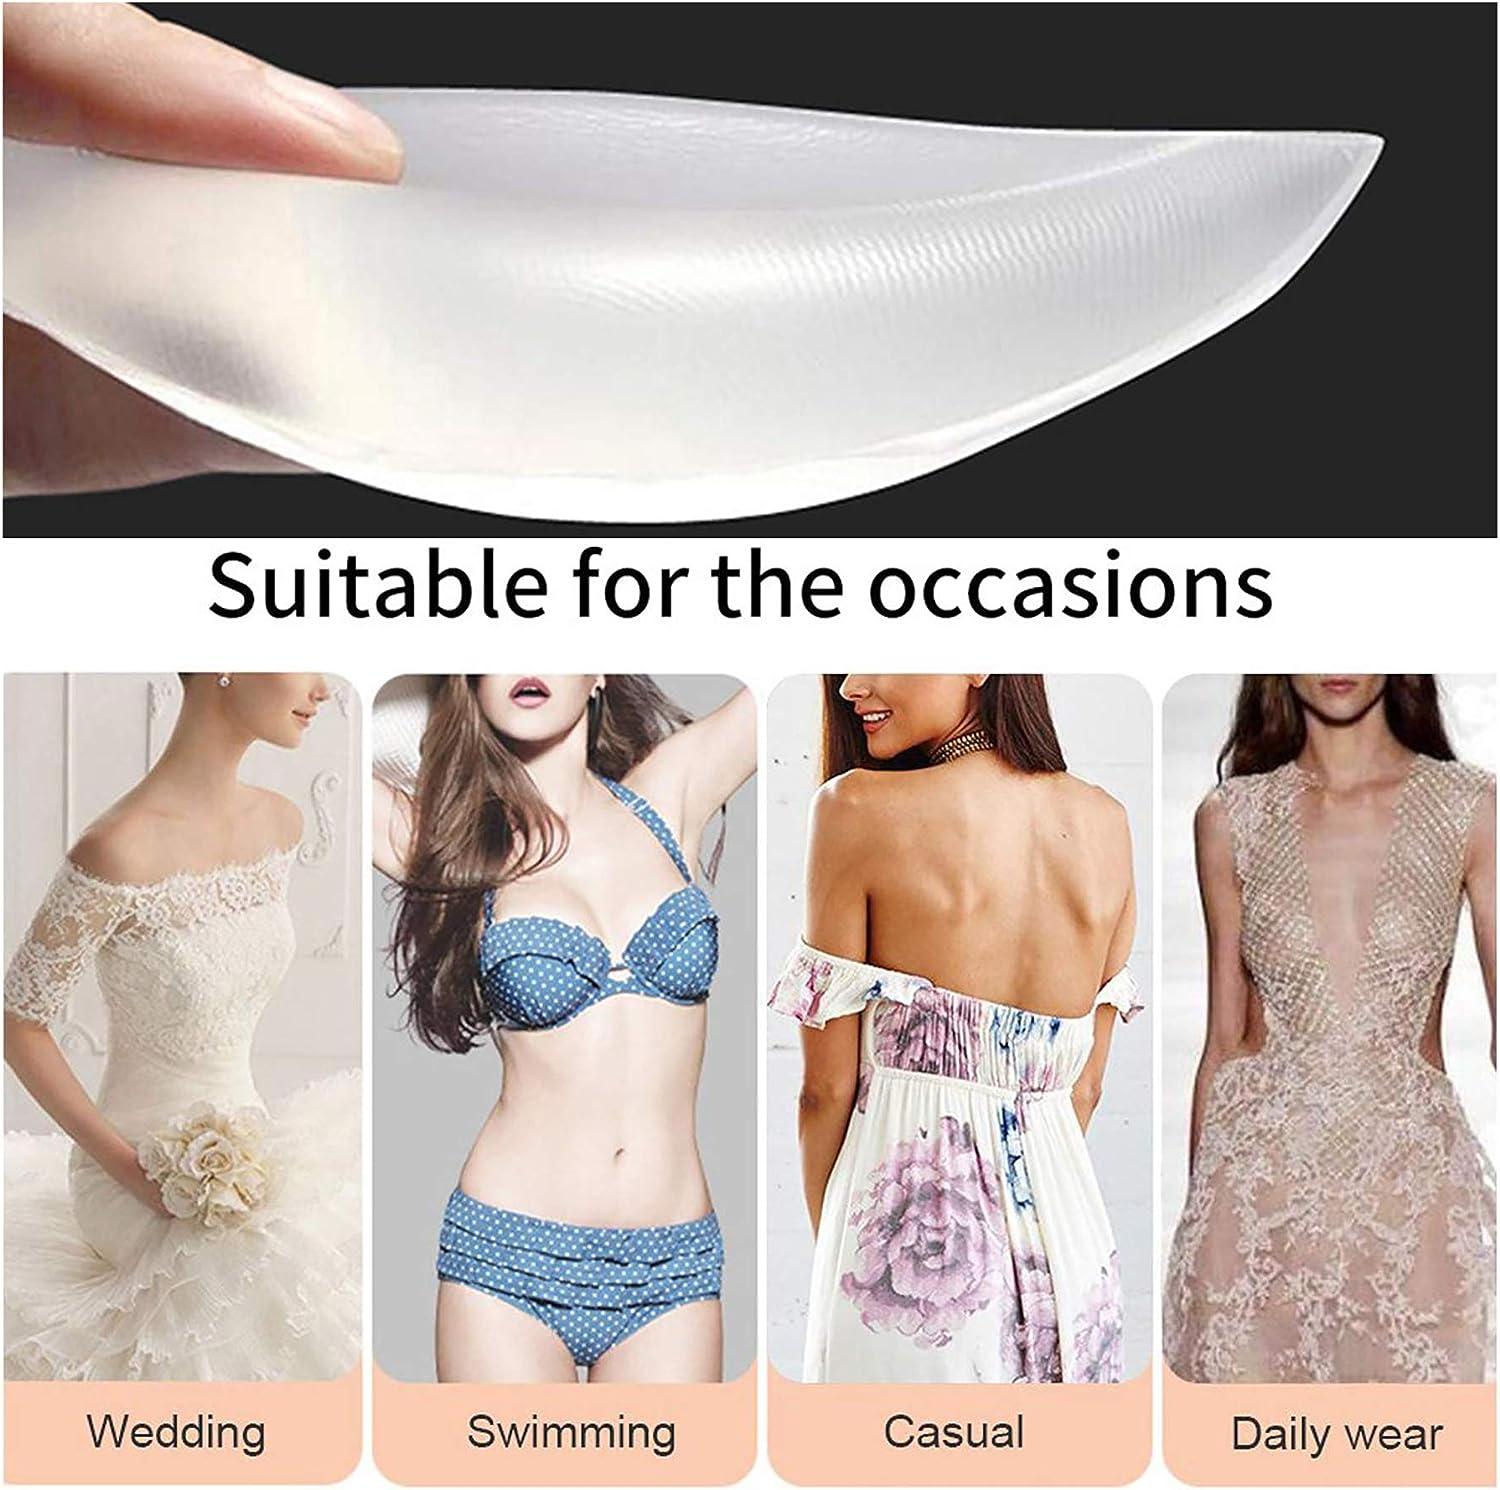 Small Bust Enhancement) One Piece Non-Woven Fabric Surface Silicone Breast  Lift Bra Pad For Wedding Dress